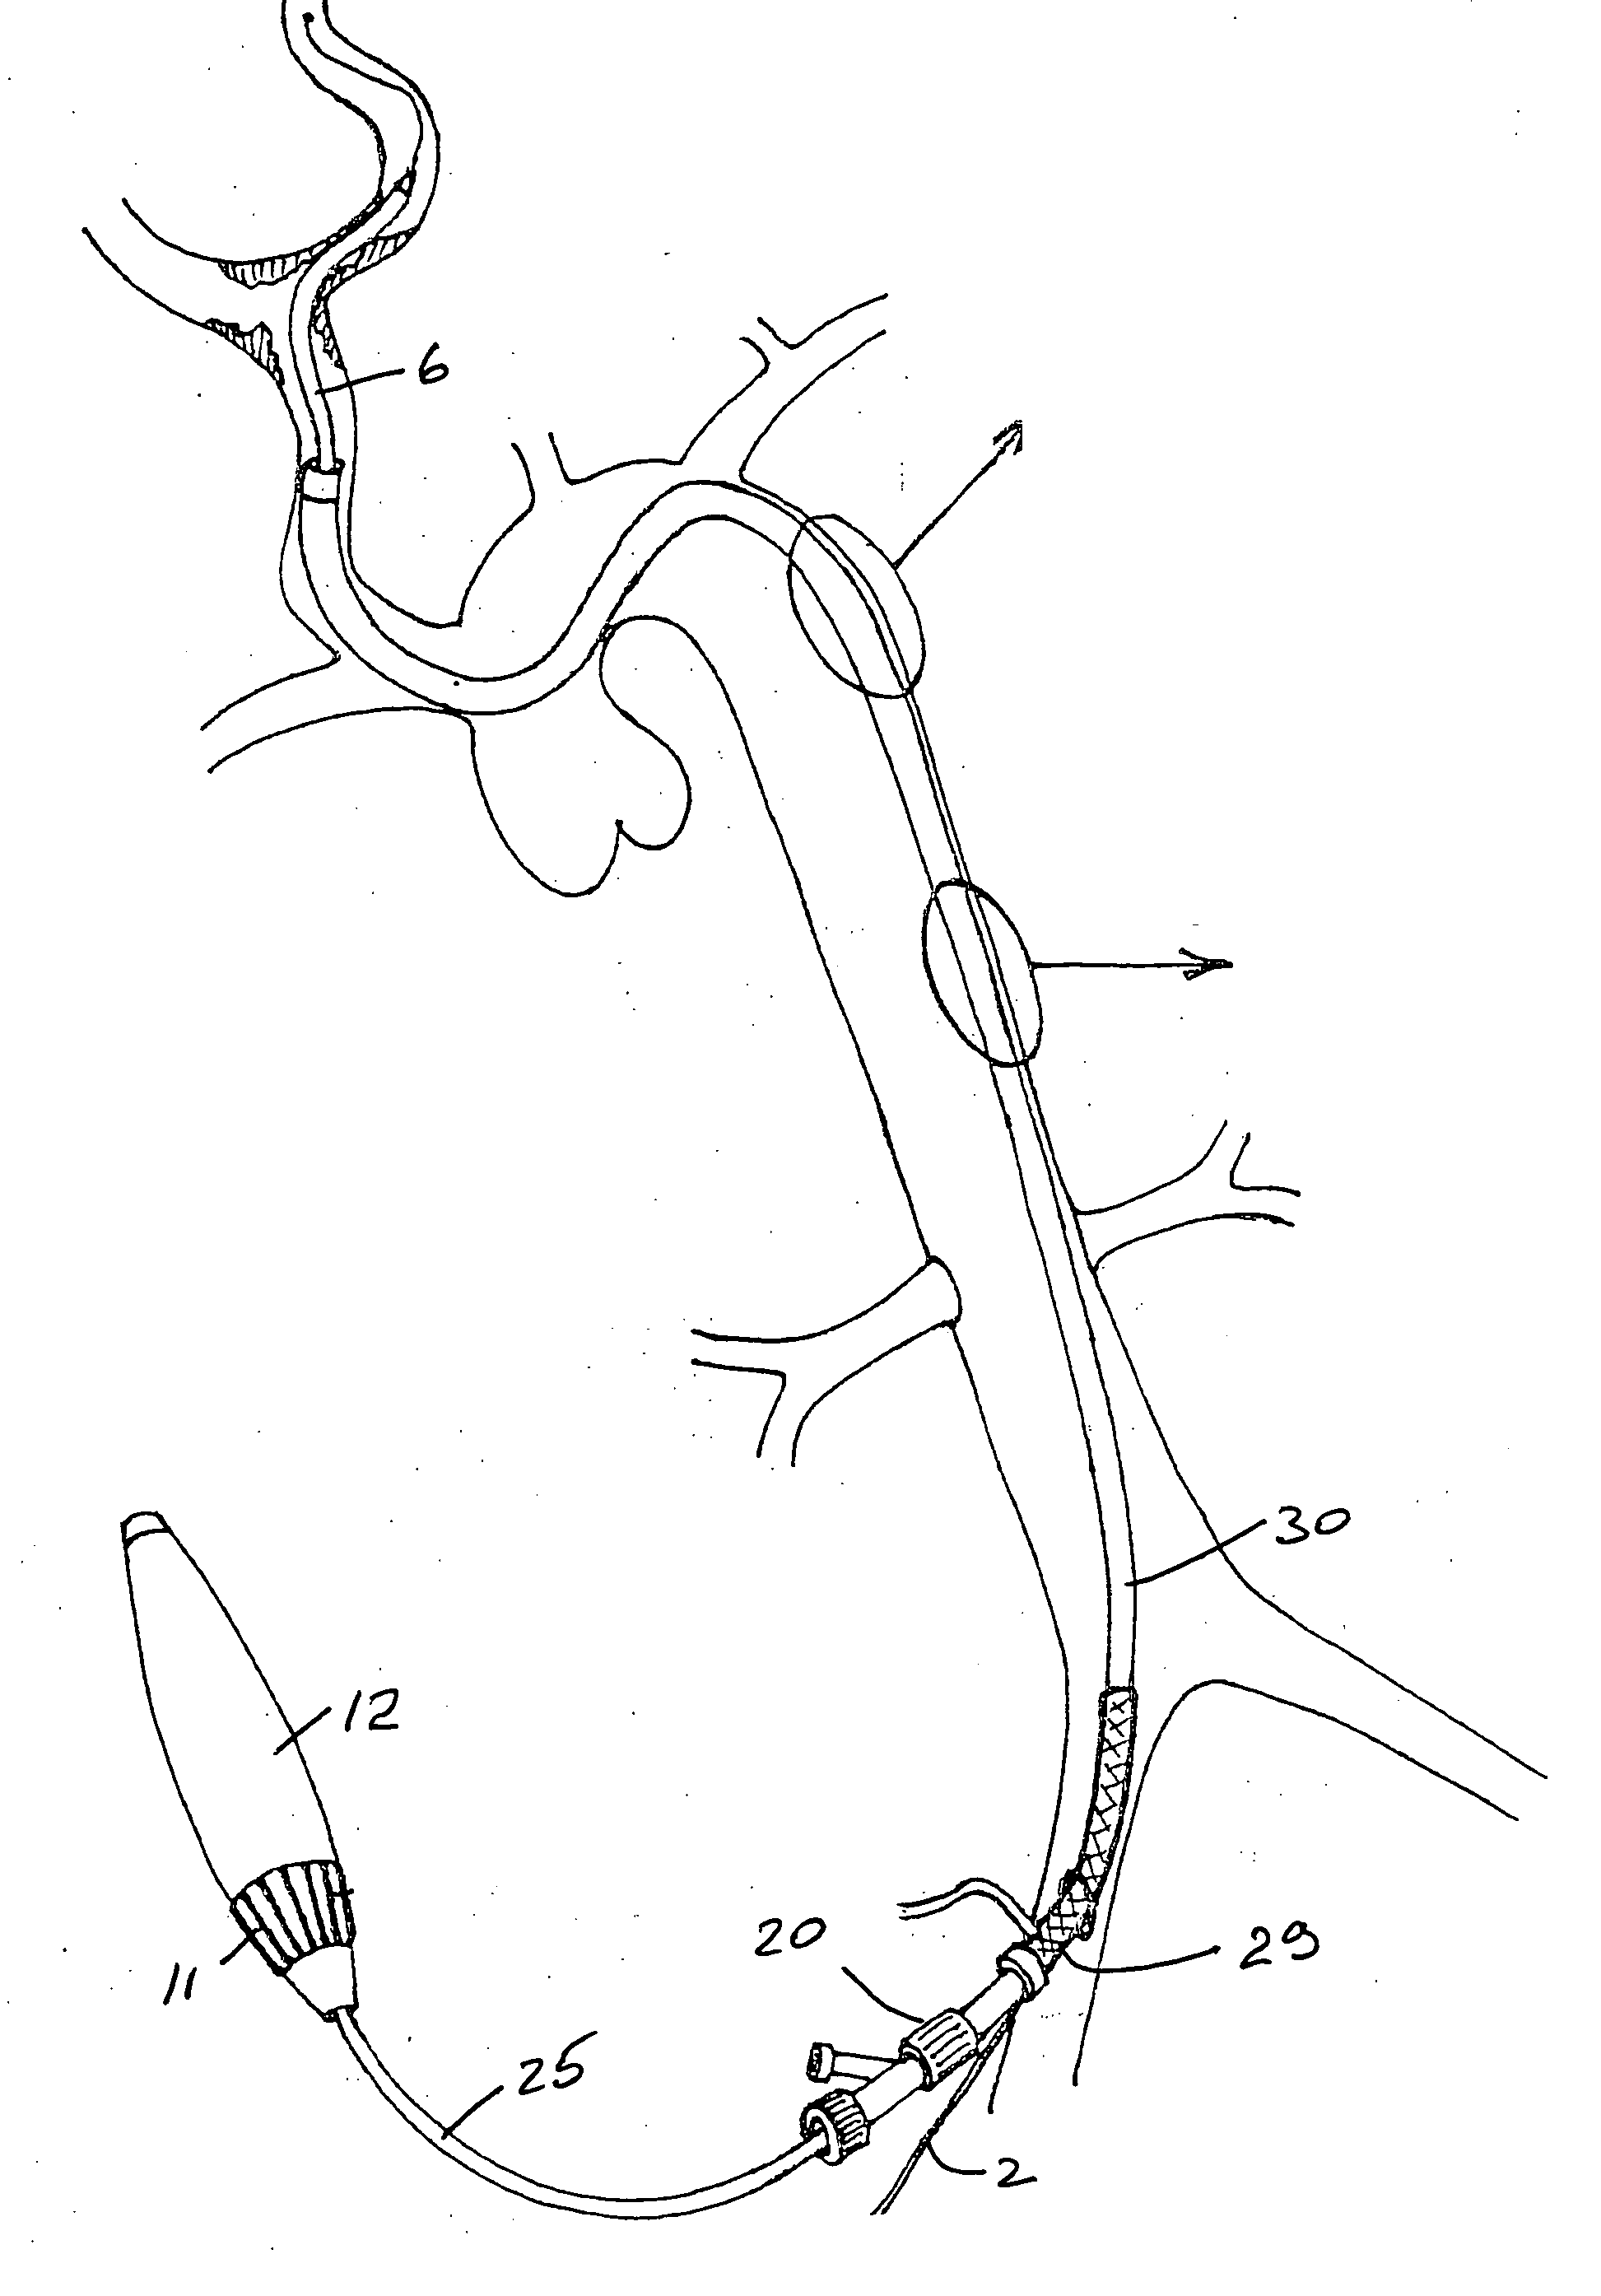 Stent delivery and deployment system